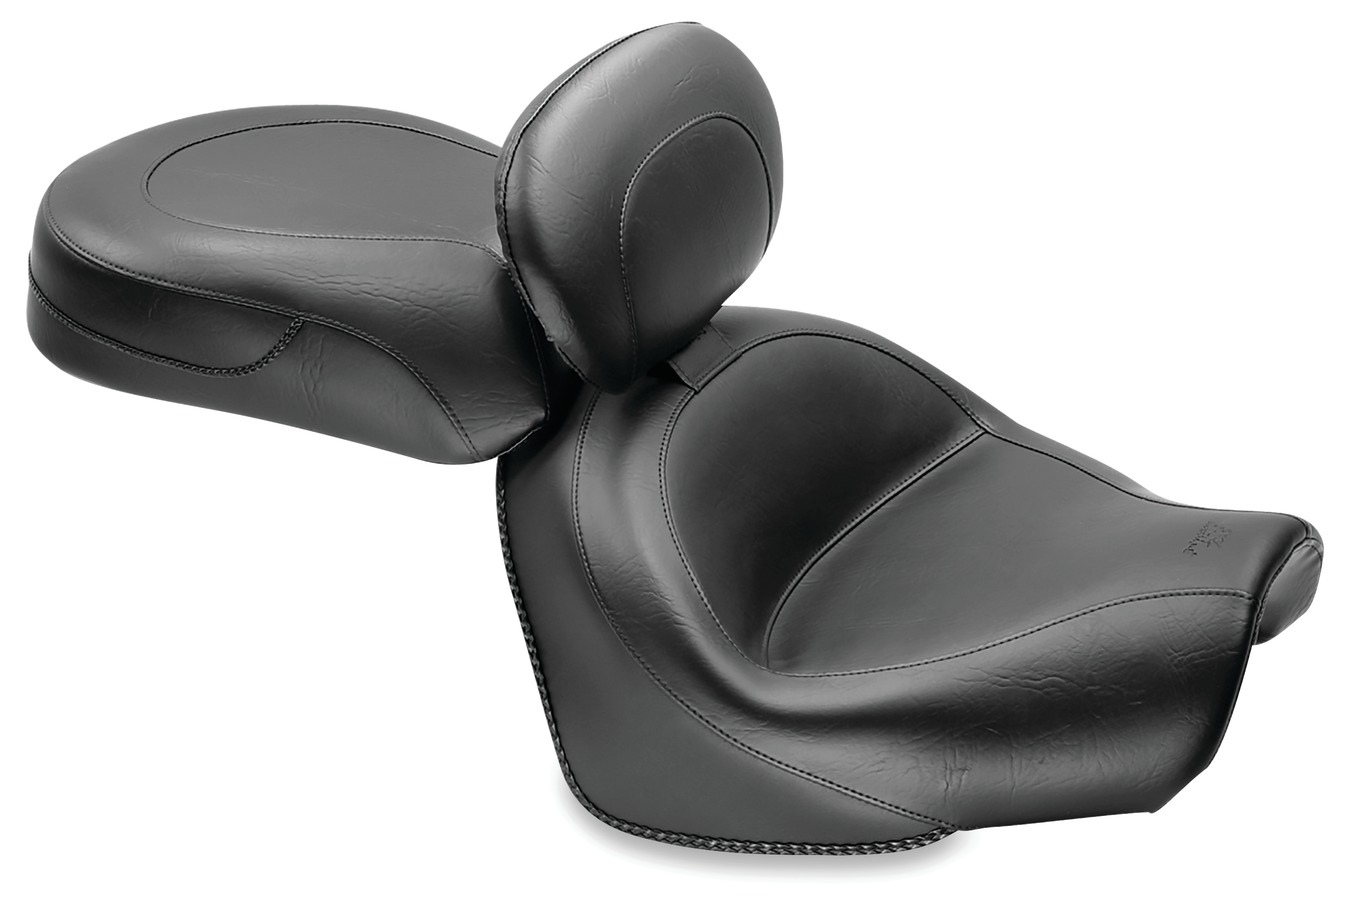 Standard Touring Two-Piece Seat with Driver Backrest for Yamaha V-Star 950 & 950 Tourer 2009-